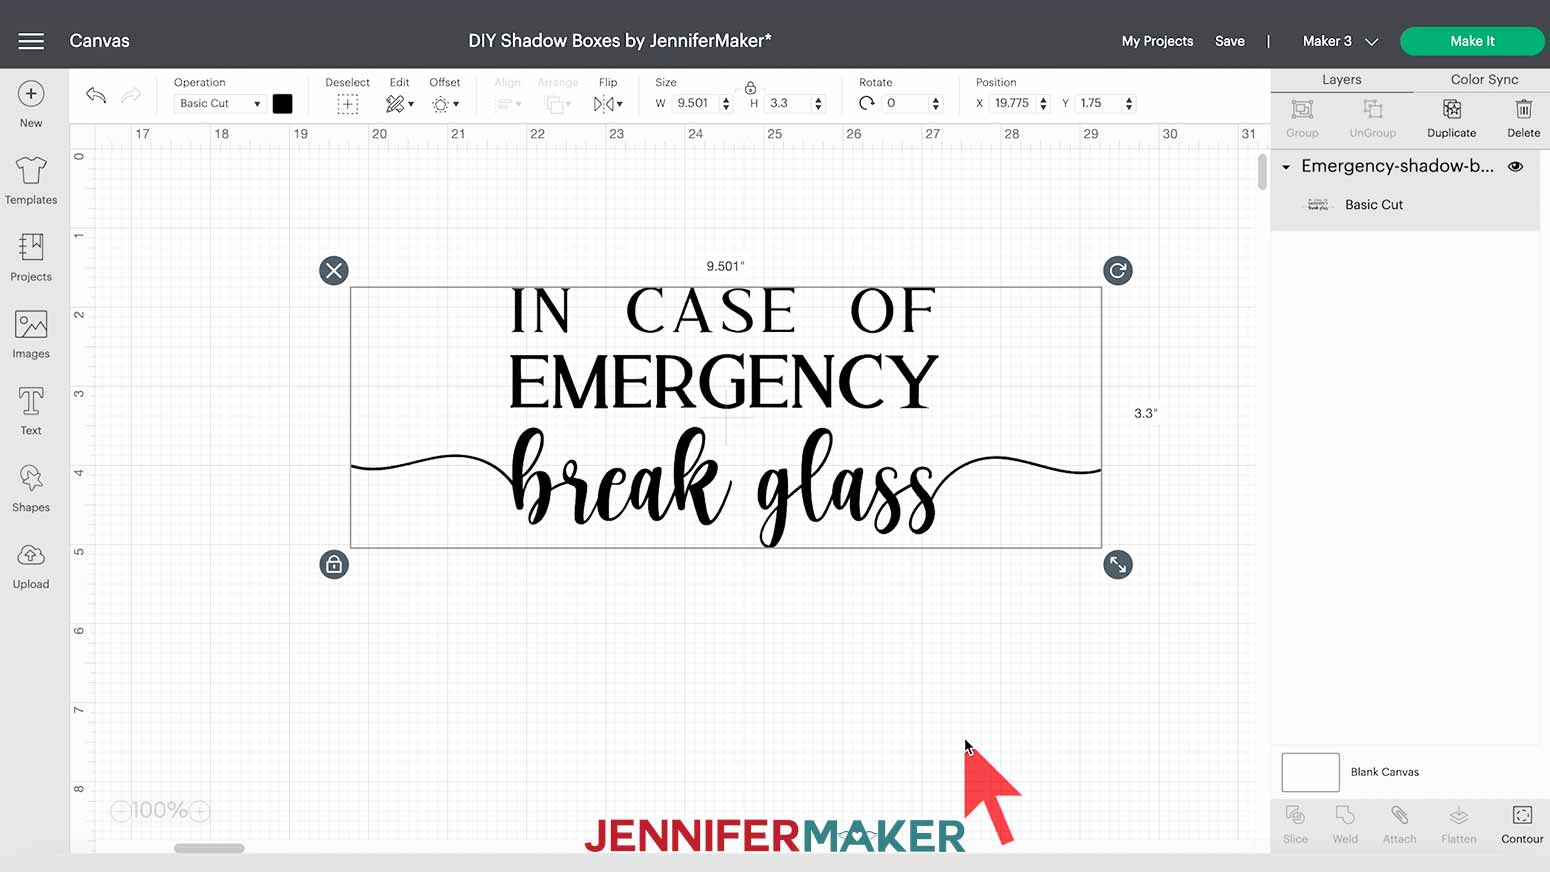 In Case of Emergency DIY shadow box decal uploaded to Design Space